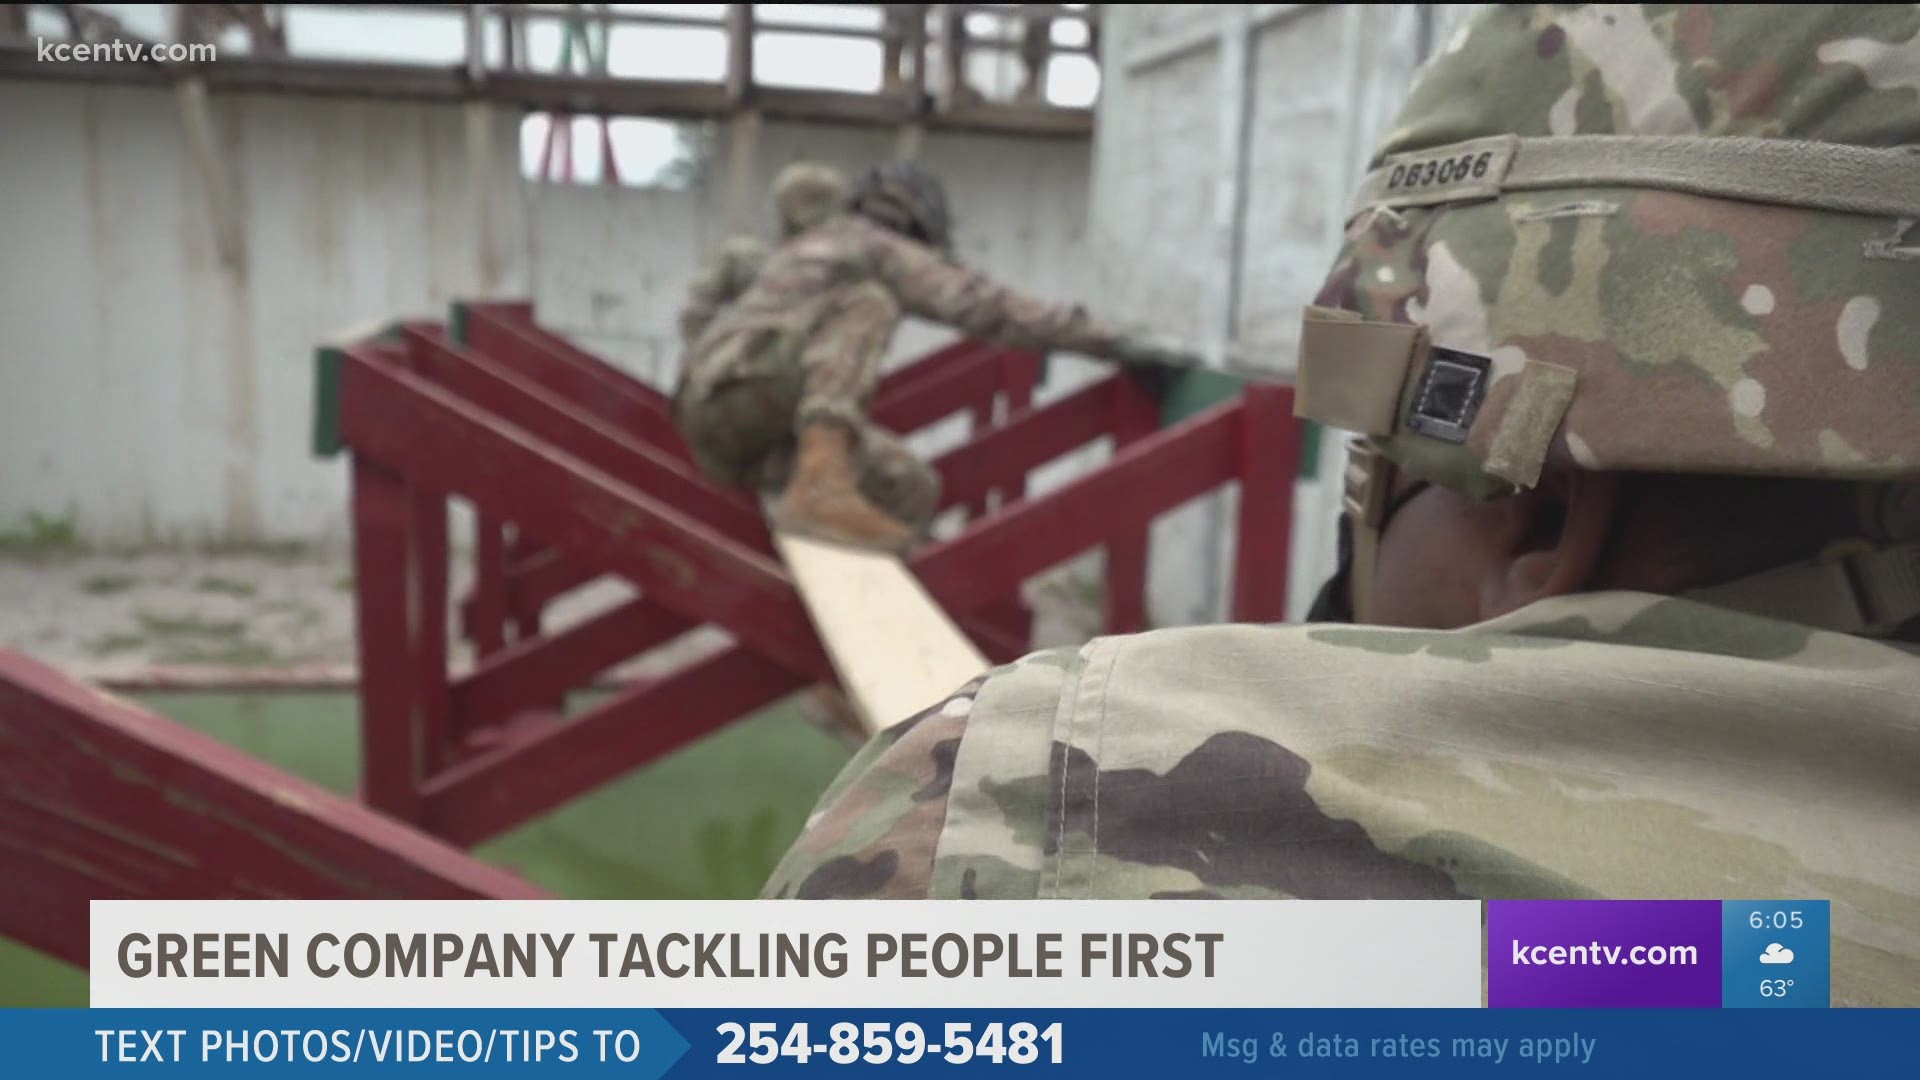 The program hopes to help focus on soldiers working as team and improving interpersonal relationships, rather than just focusing on larger goals at hand.